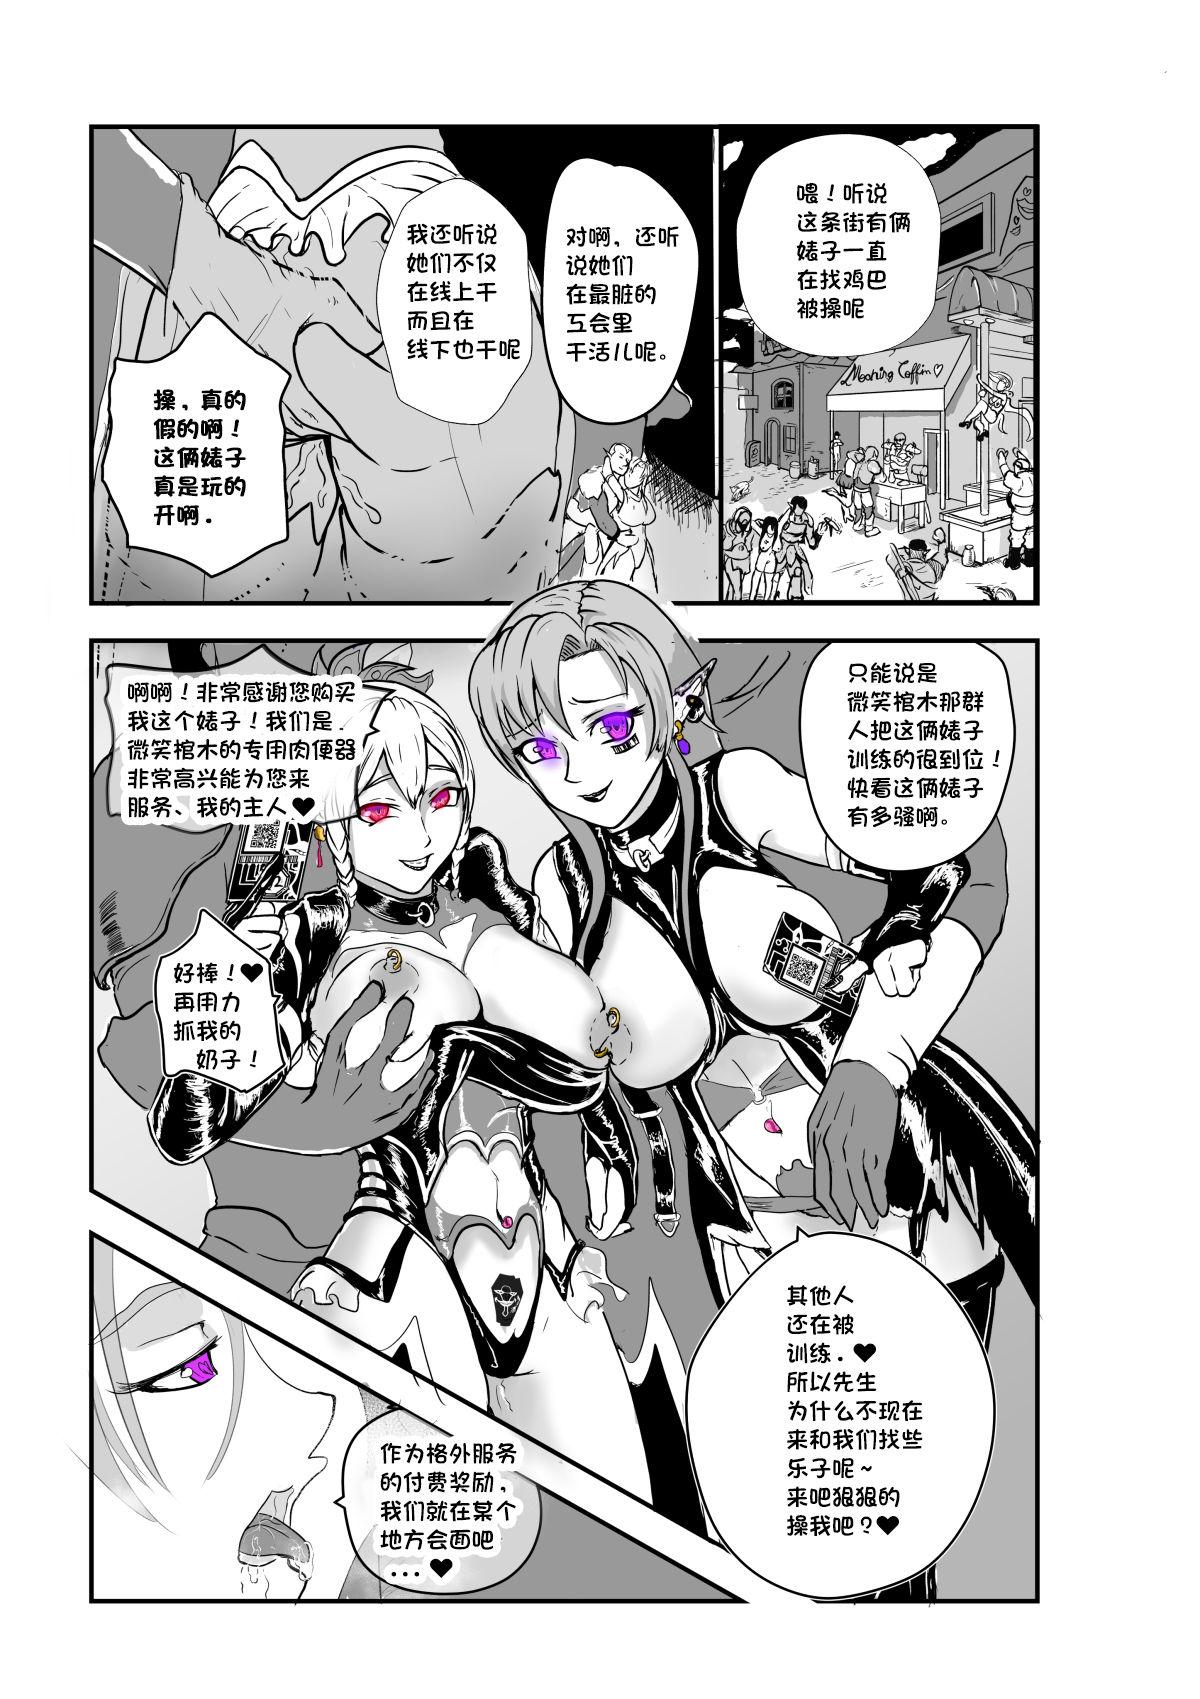 Fisting SAO Lustful Obedience Release - Sword art online Nut - Page 3